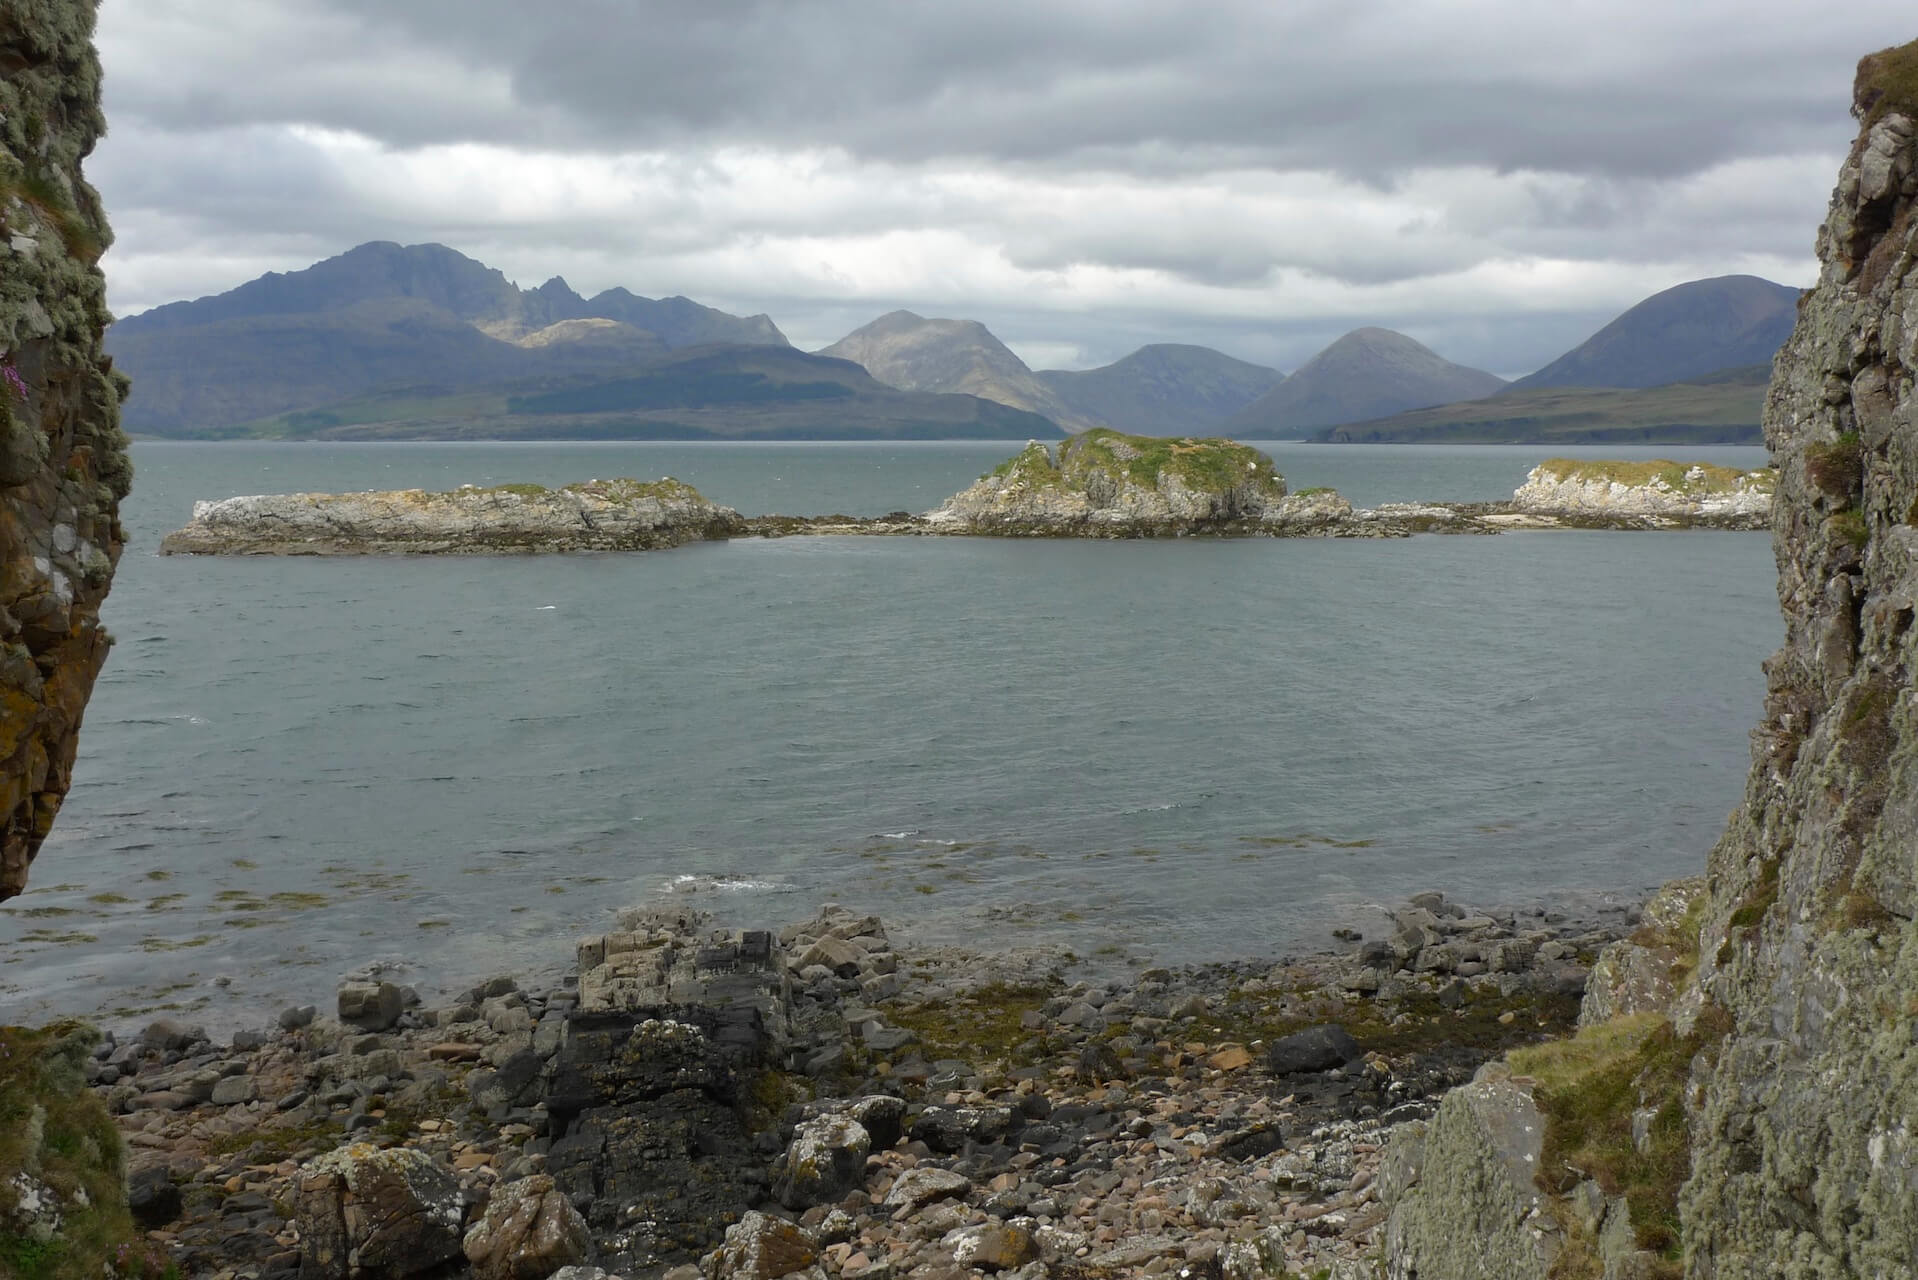 A view of the Cuillins from Dunscaith Castle near Tokavaig, Sleat Peninsula, Skye